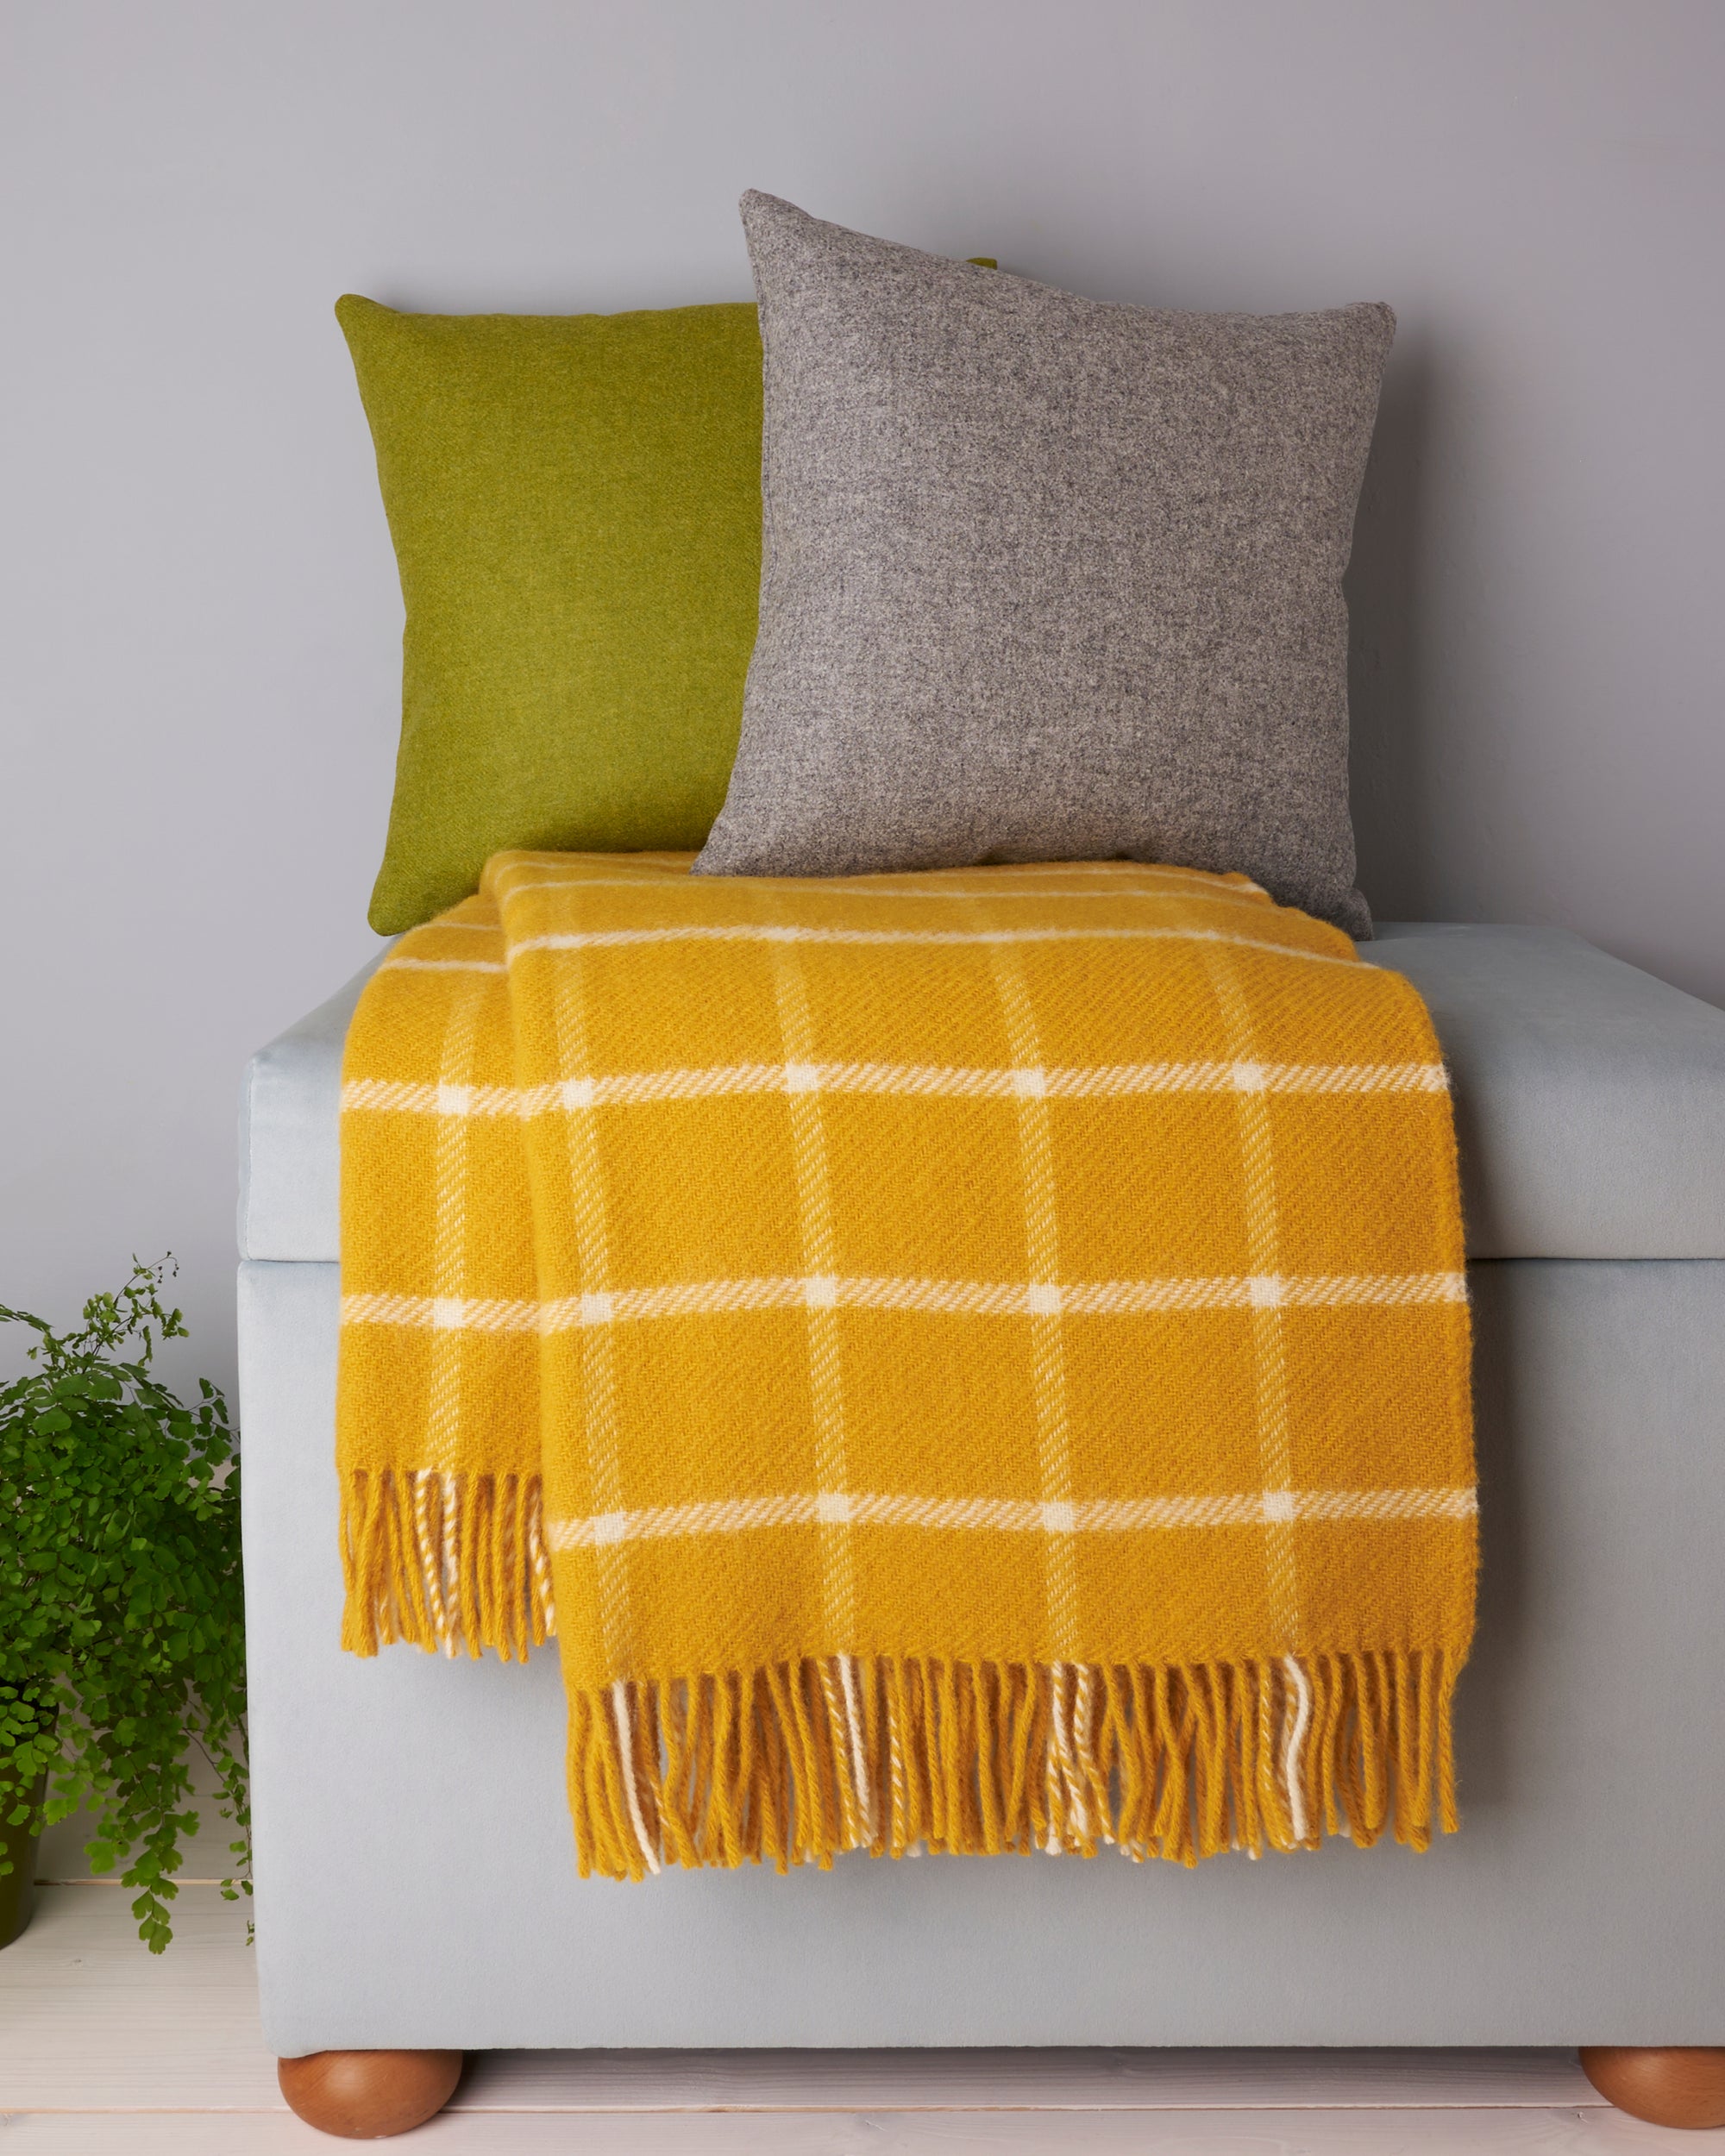 Tweedmill chequered check yellow wool blanket throw